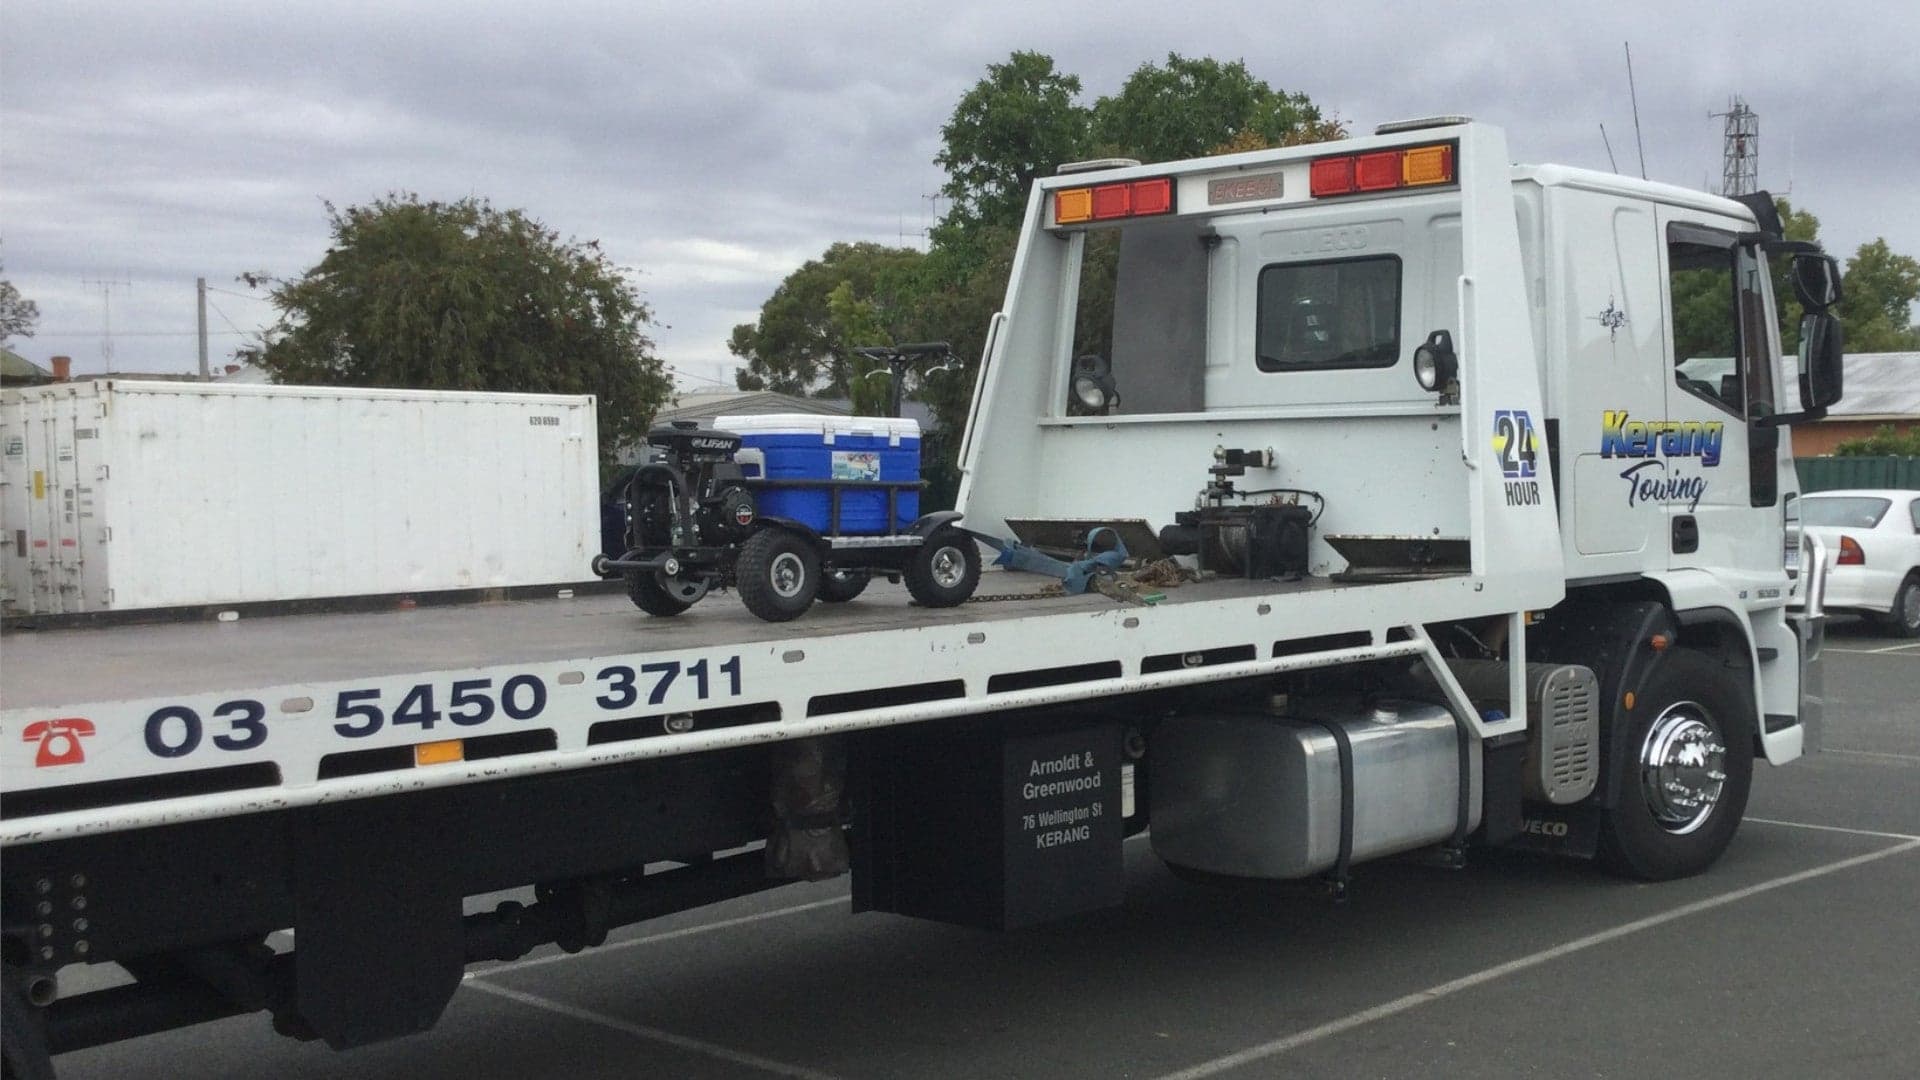 Australian Police Impounded a Motorized Cooler and the Photo Is Amazing